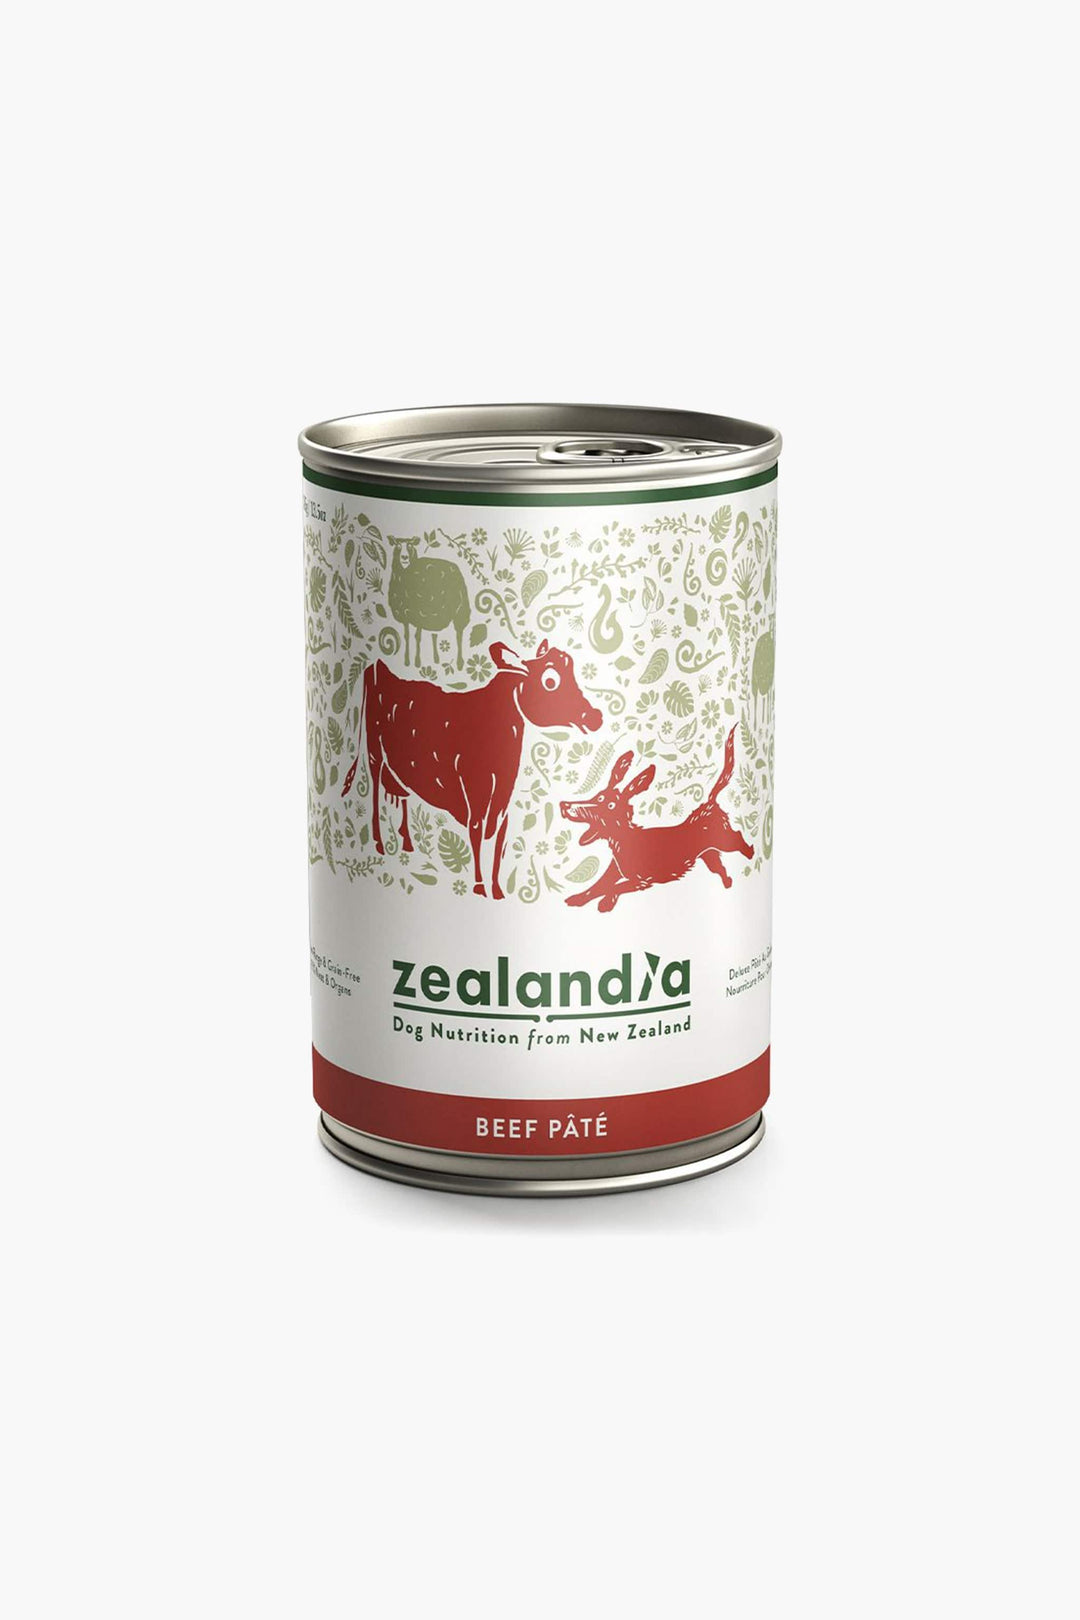 Zealandia Beef Pate - High-Quality and Natural Dog Food for Optimum Pet Health 385g